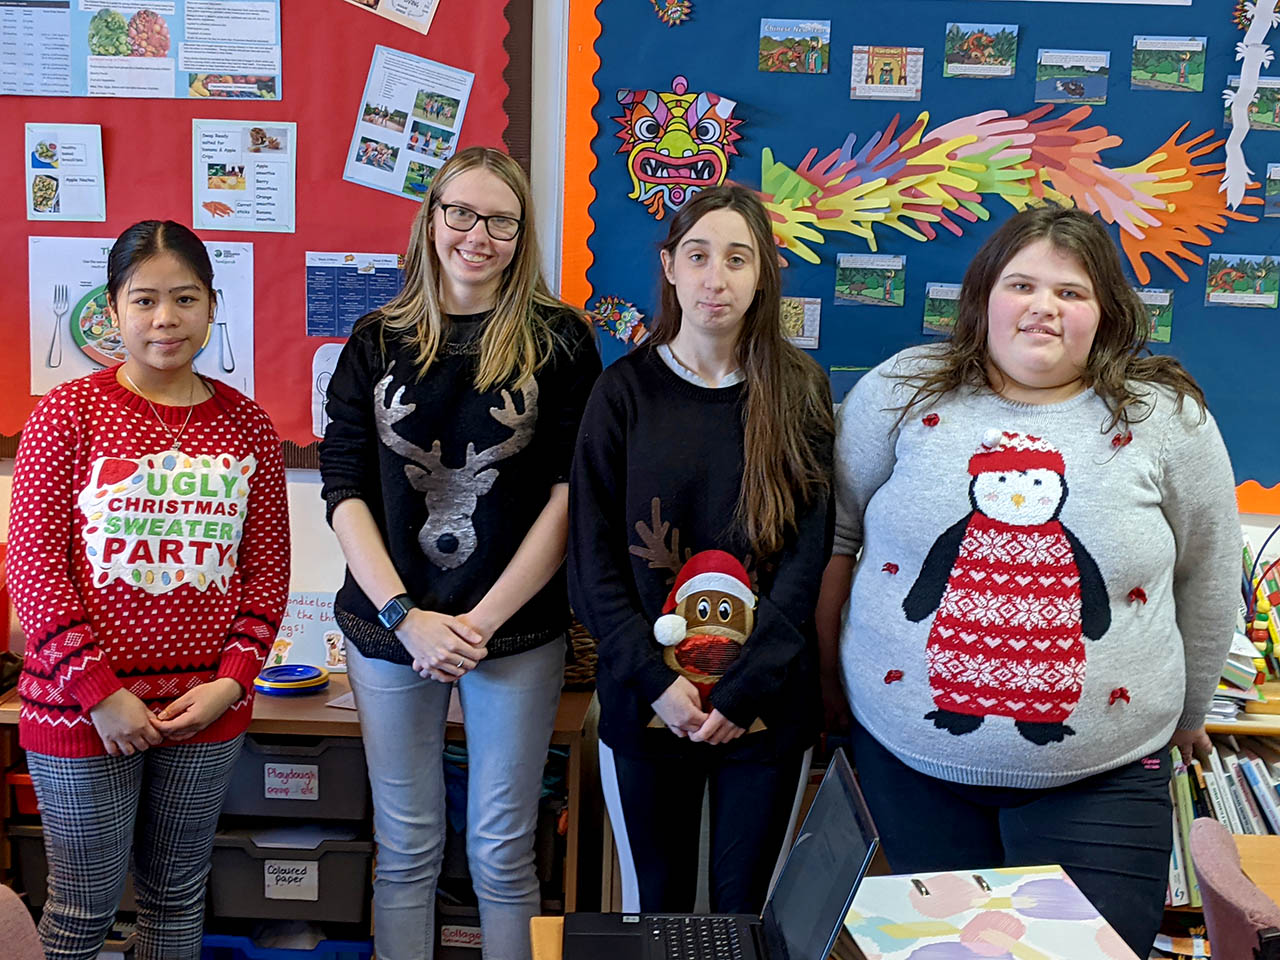 Students wearing Christmas jumpers